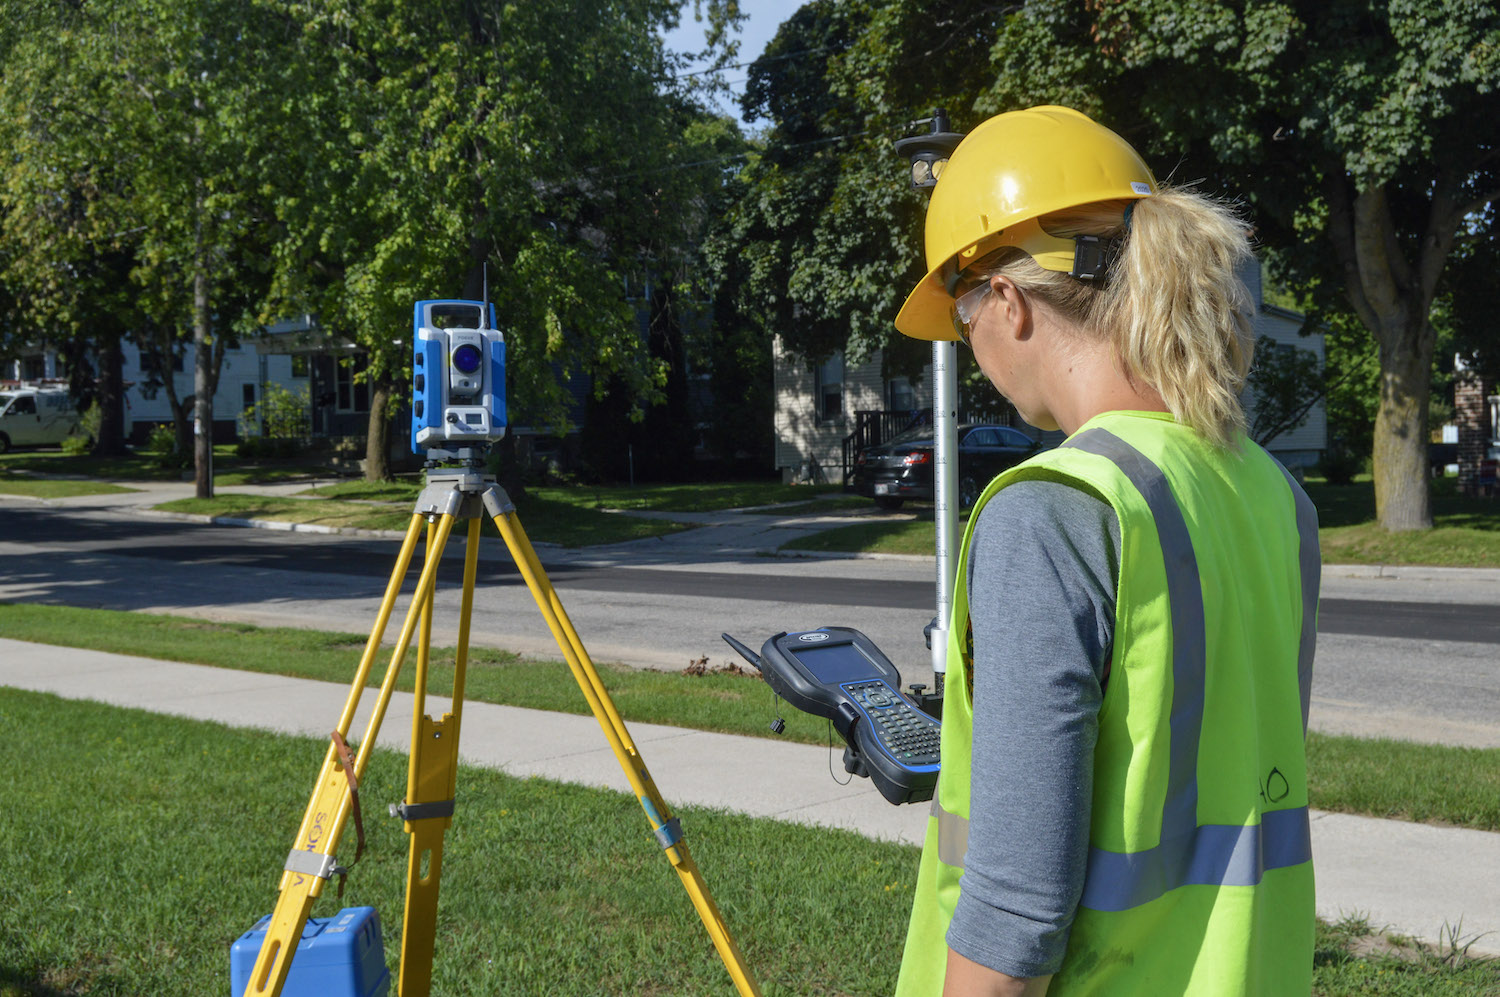 A woman wearing a safety vest and helmet works survey equipment.